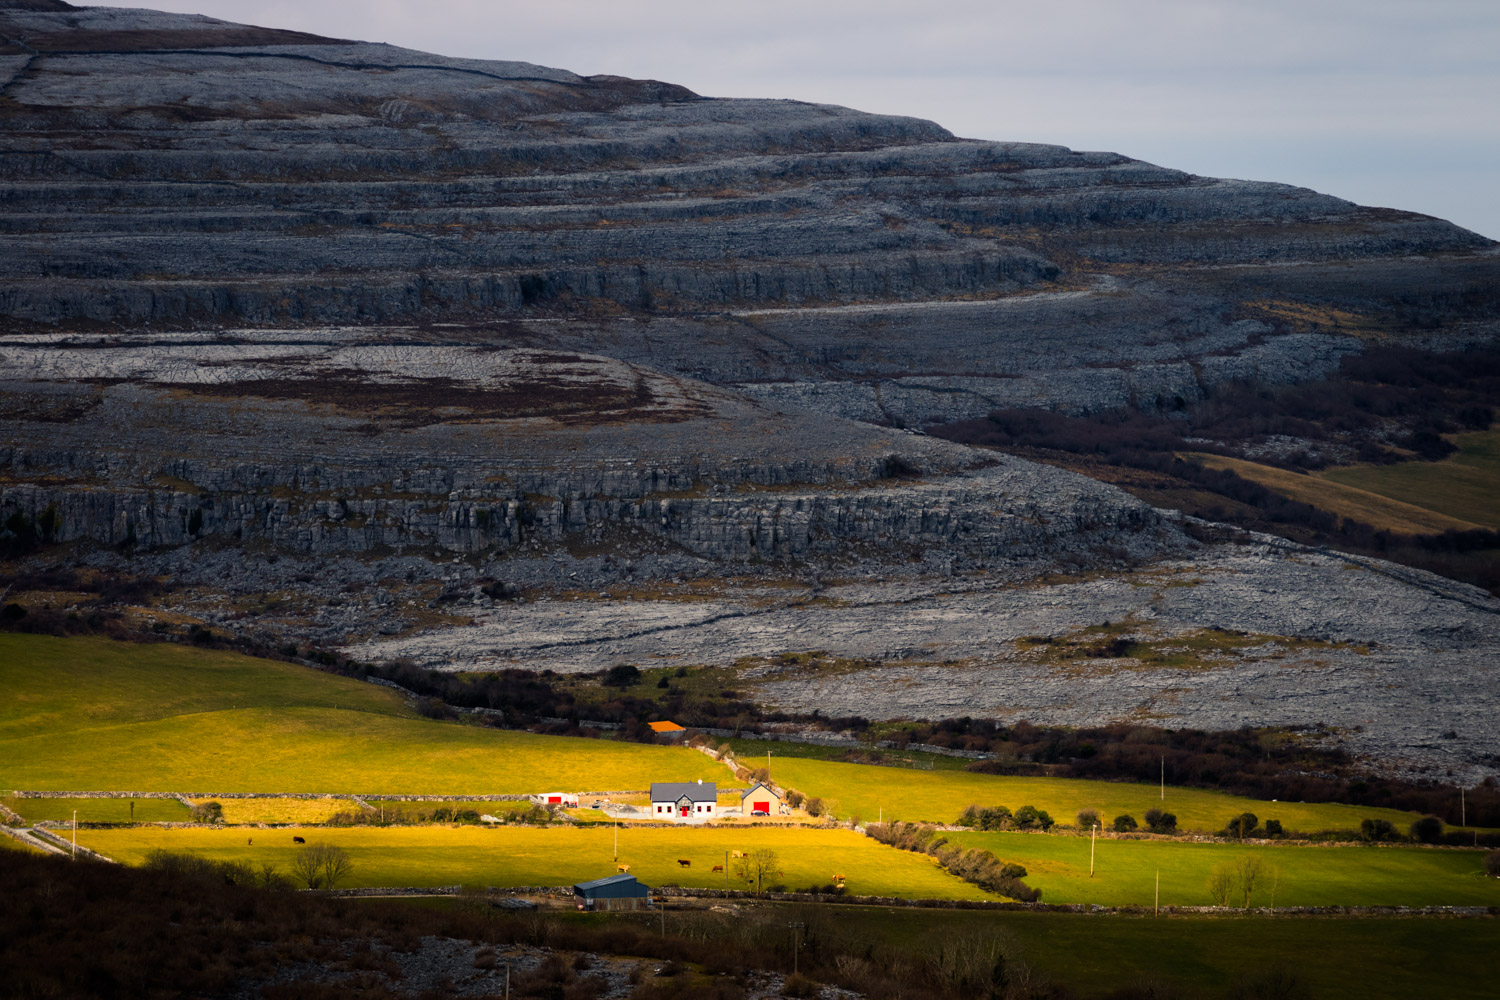  Our car broke down at the top of a place locally known as Corkscrew Hill. We had this view of The Burren while we waited 3 hours for assistance. 